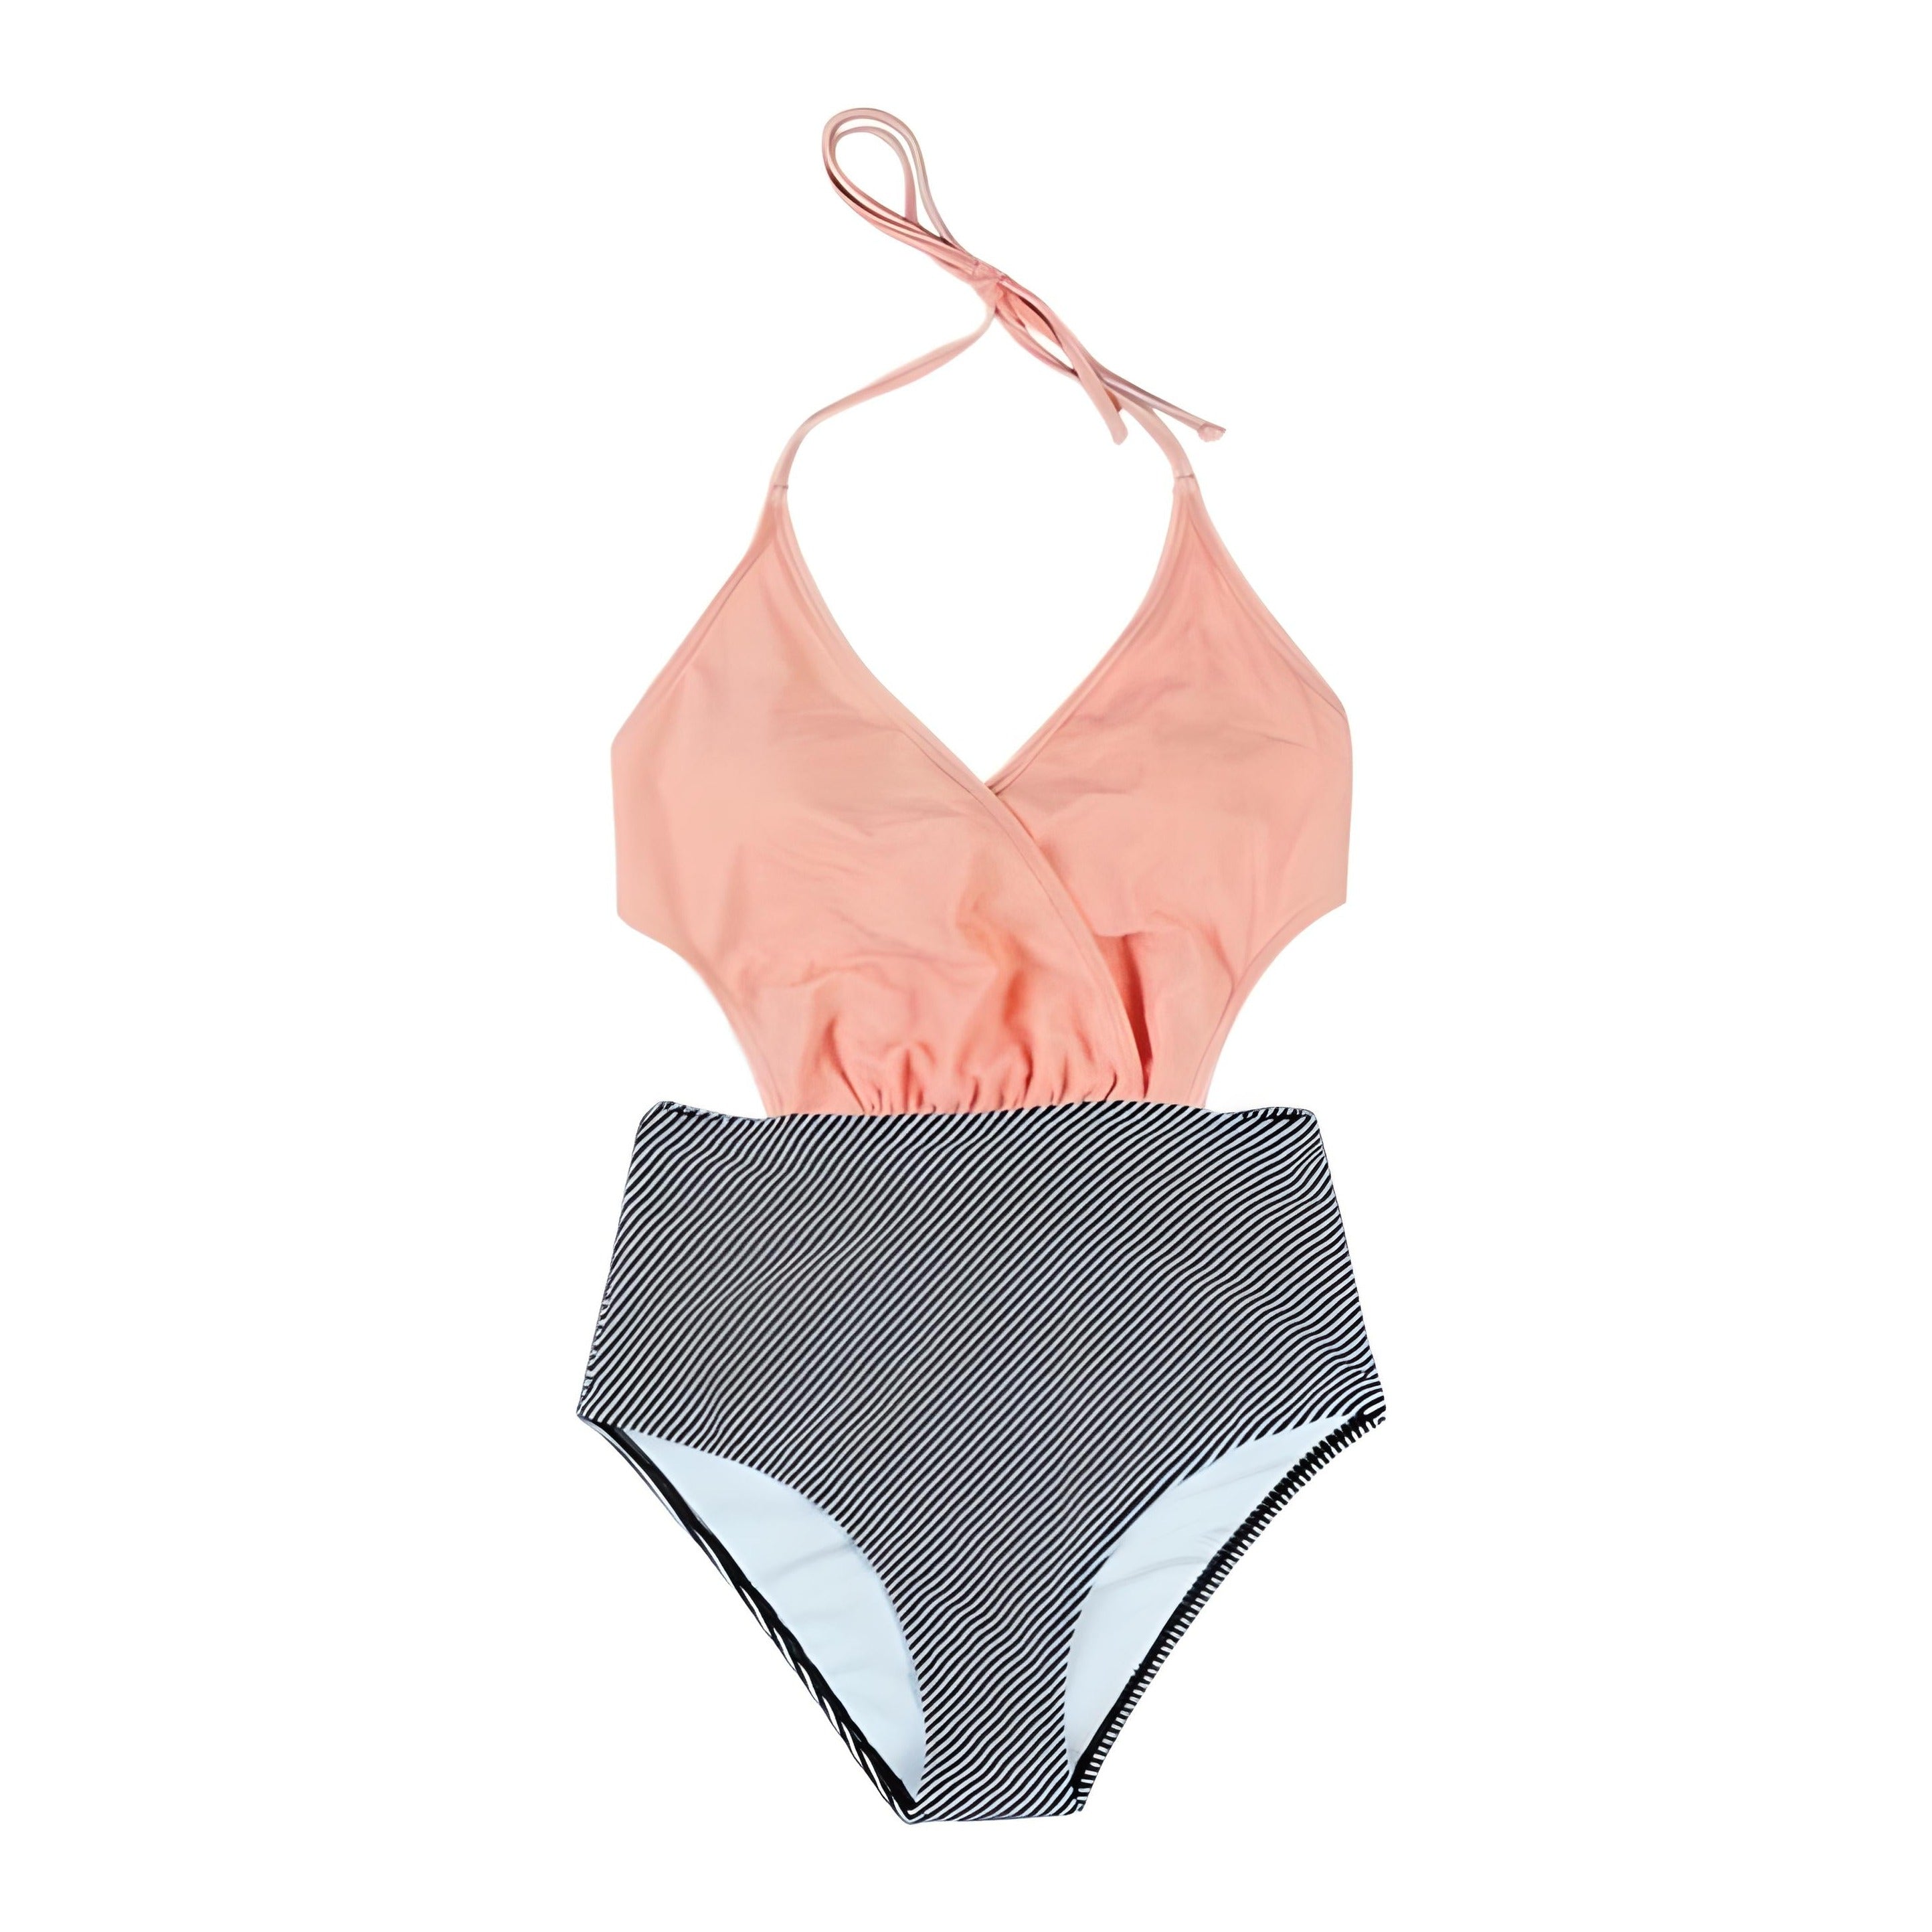 Backless Lace-Up One-Piece Swimsuit - Pink Gray / S -